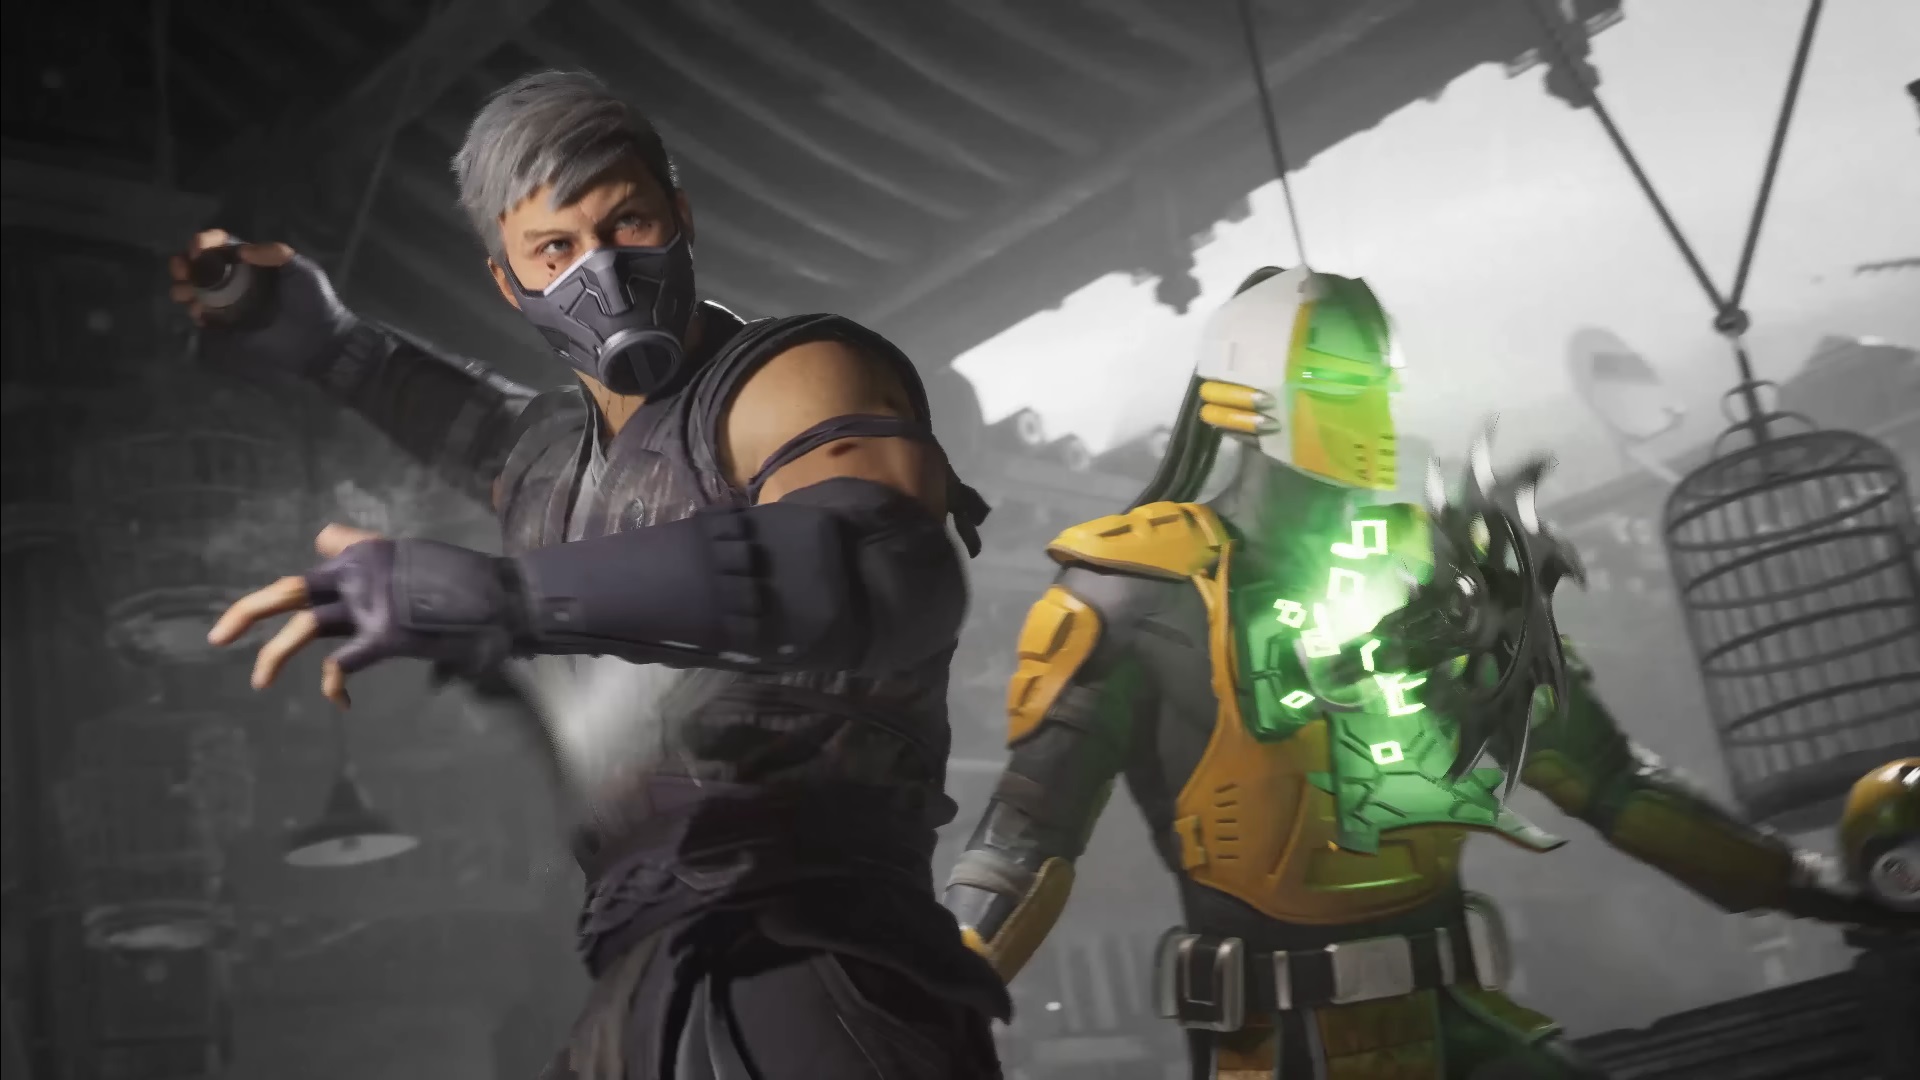 Mortal Kombat 1 Day One Patch Brings Fixes for Invasions, Story Mode, and More